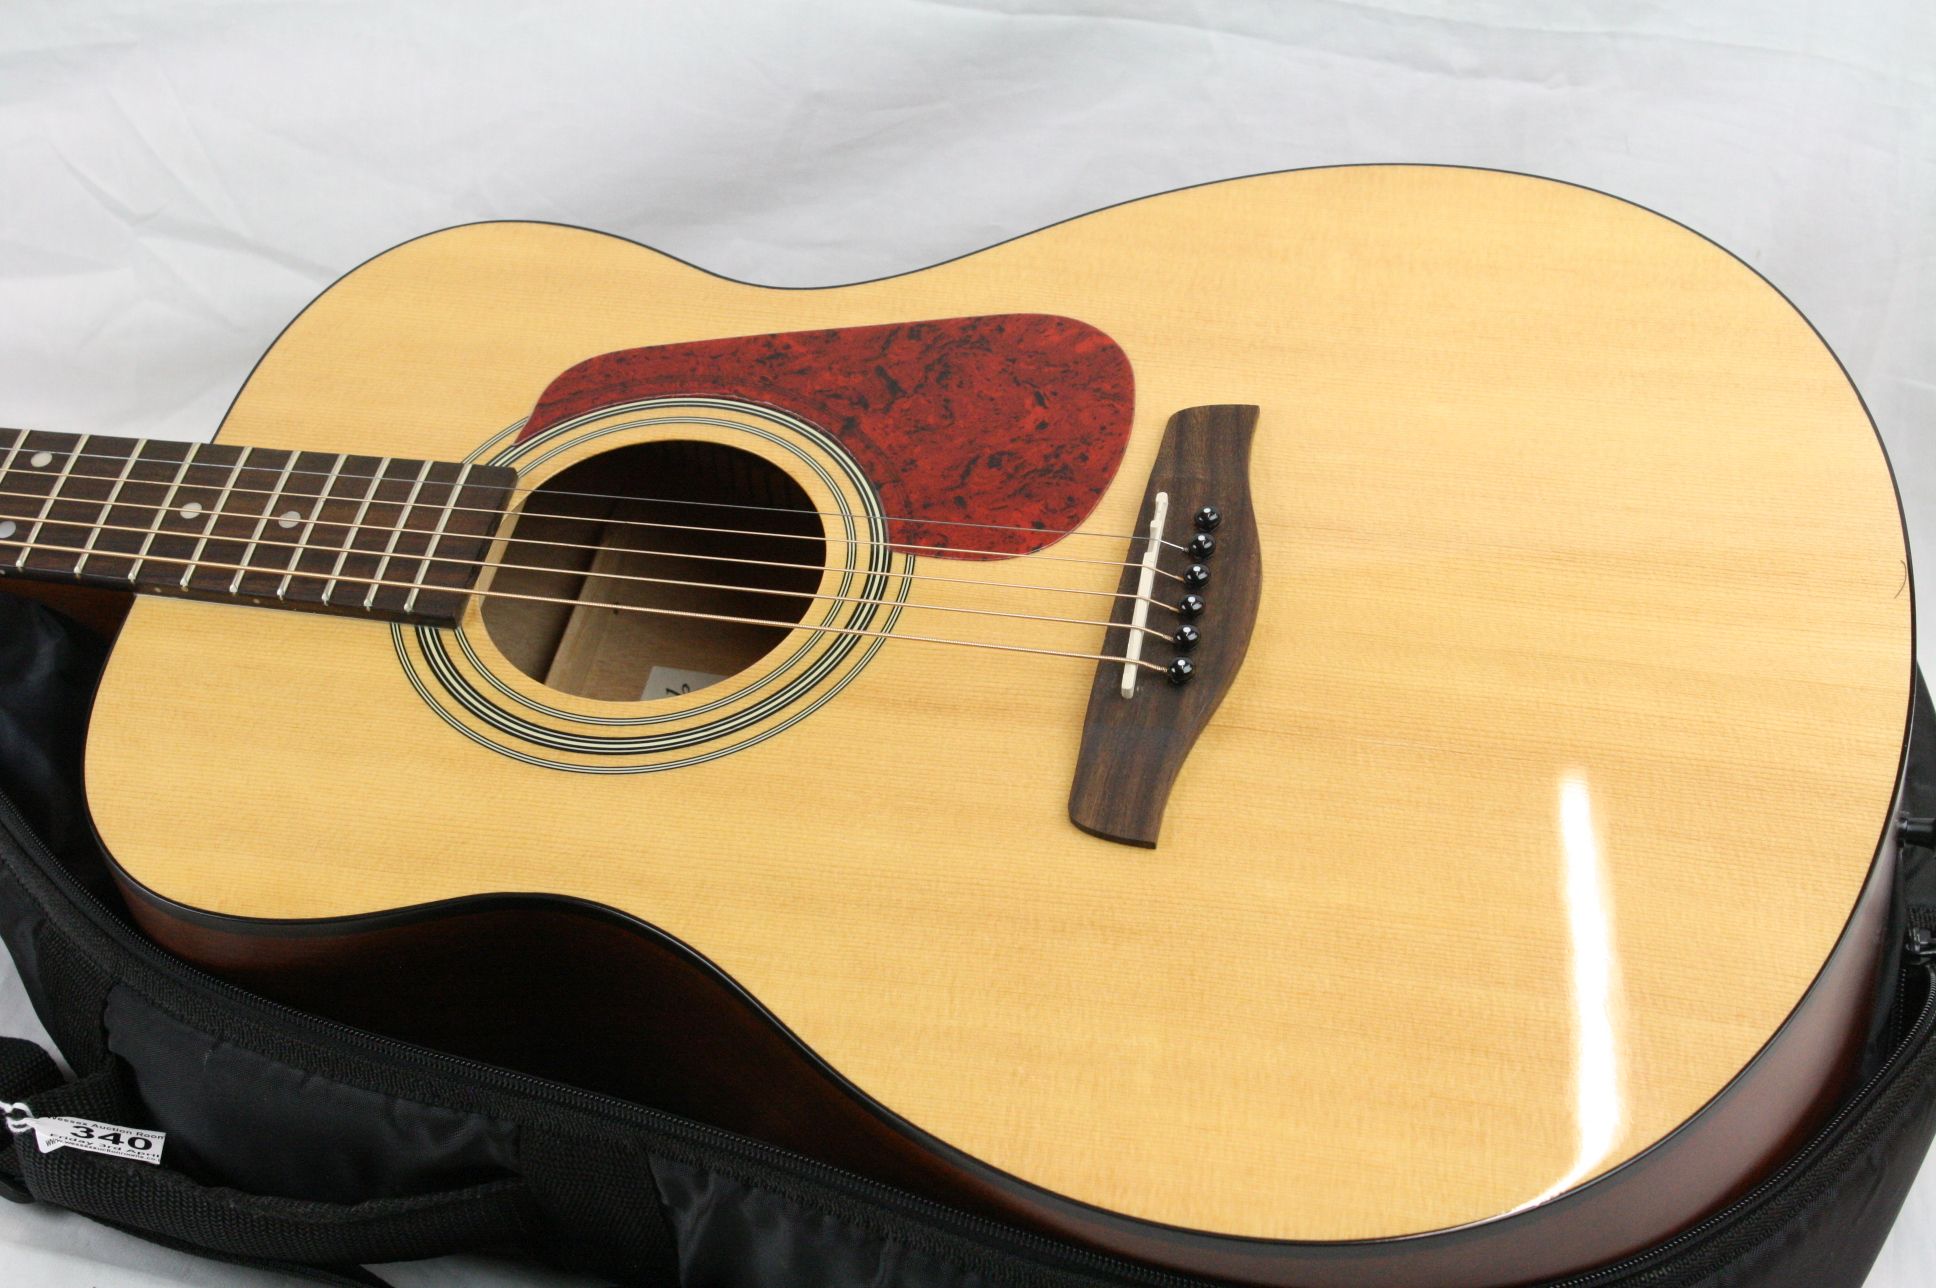 Guitar - A Brunswick BF200 acoustic guitar in natural finish, along with a gig bag. Good condition. - Image 3 of 6